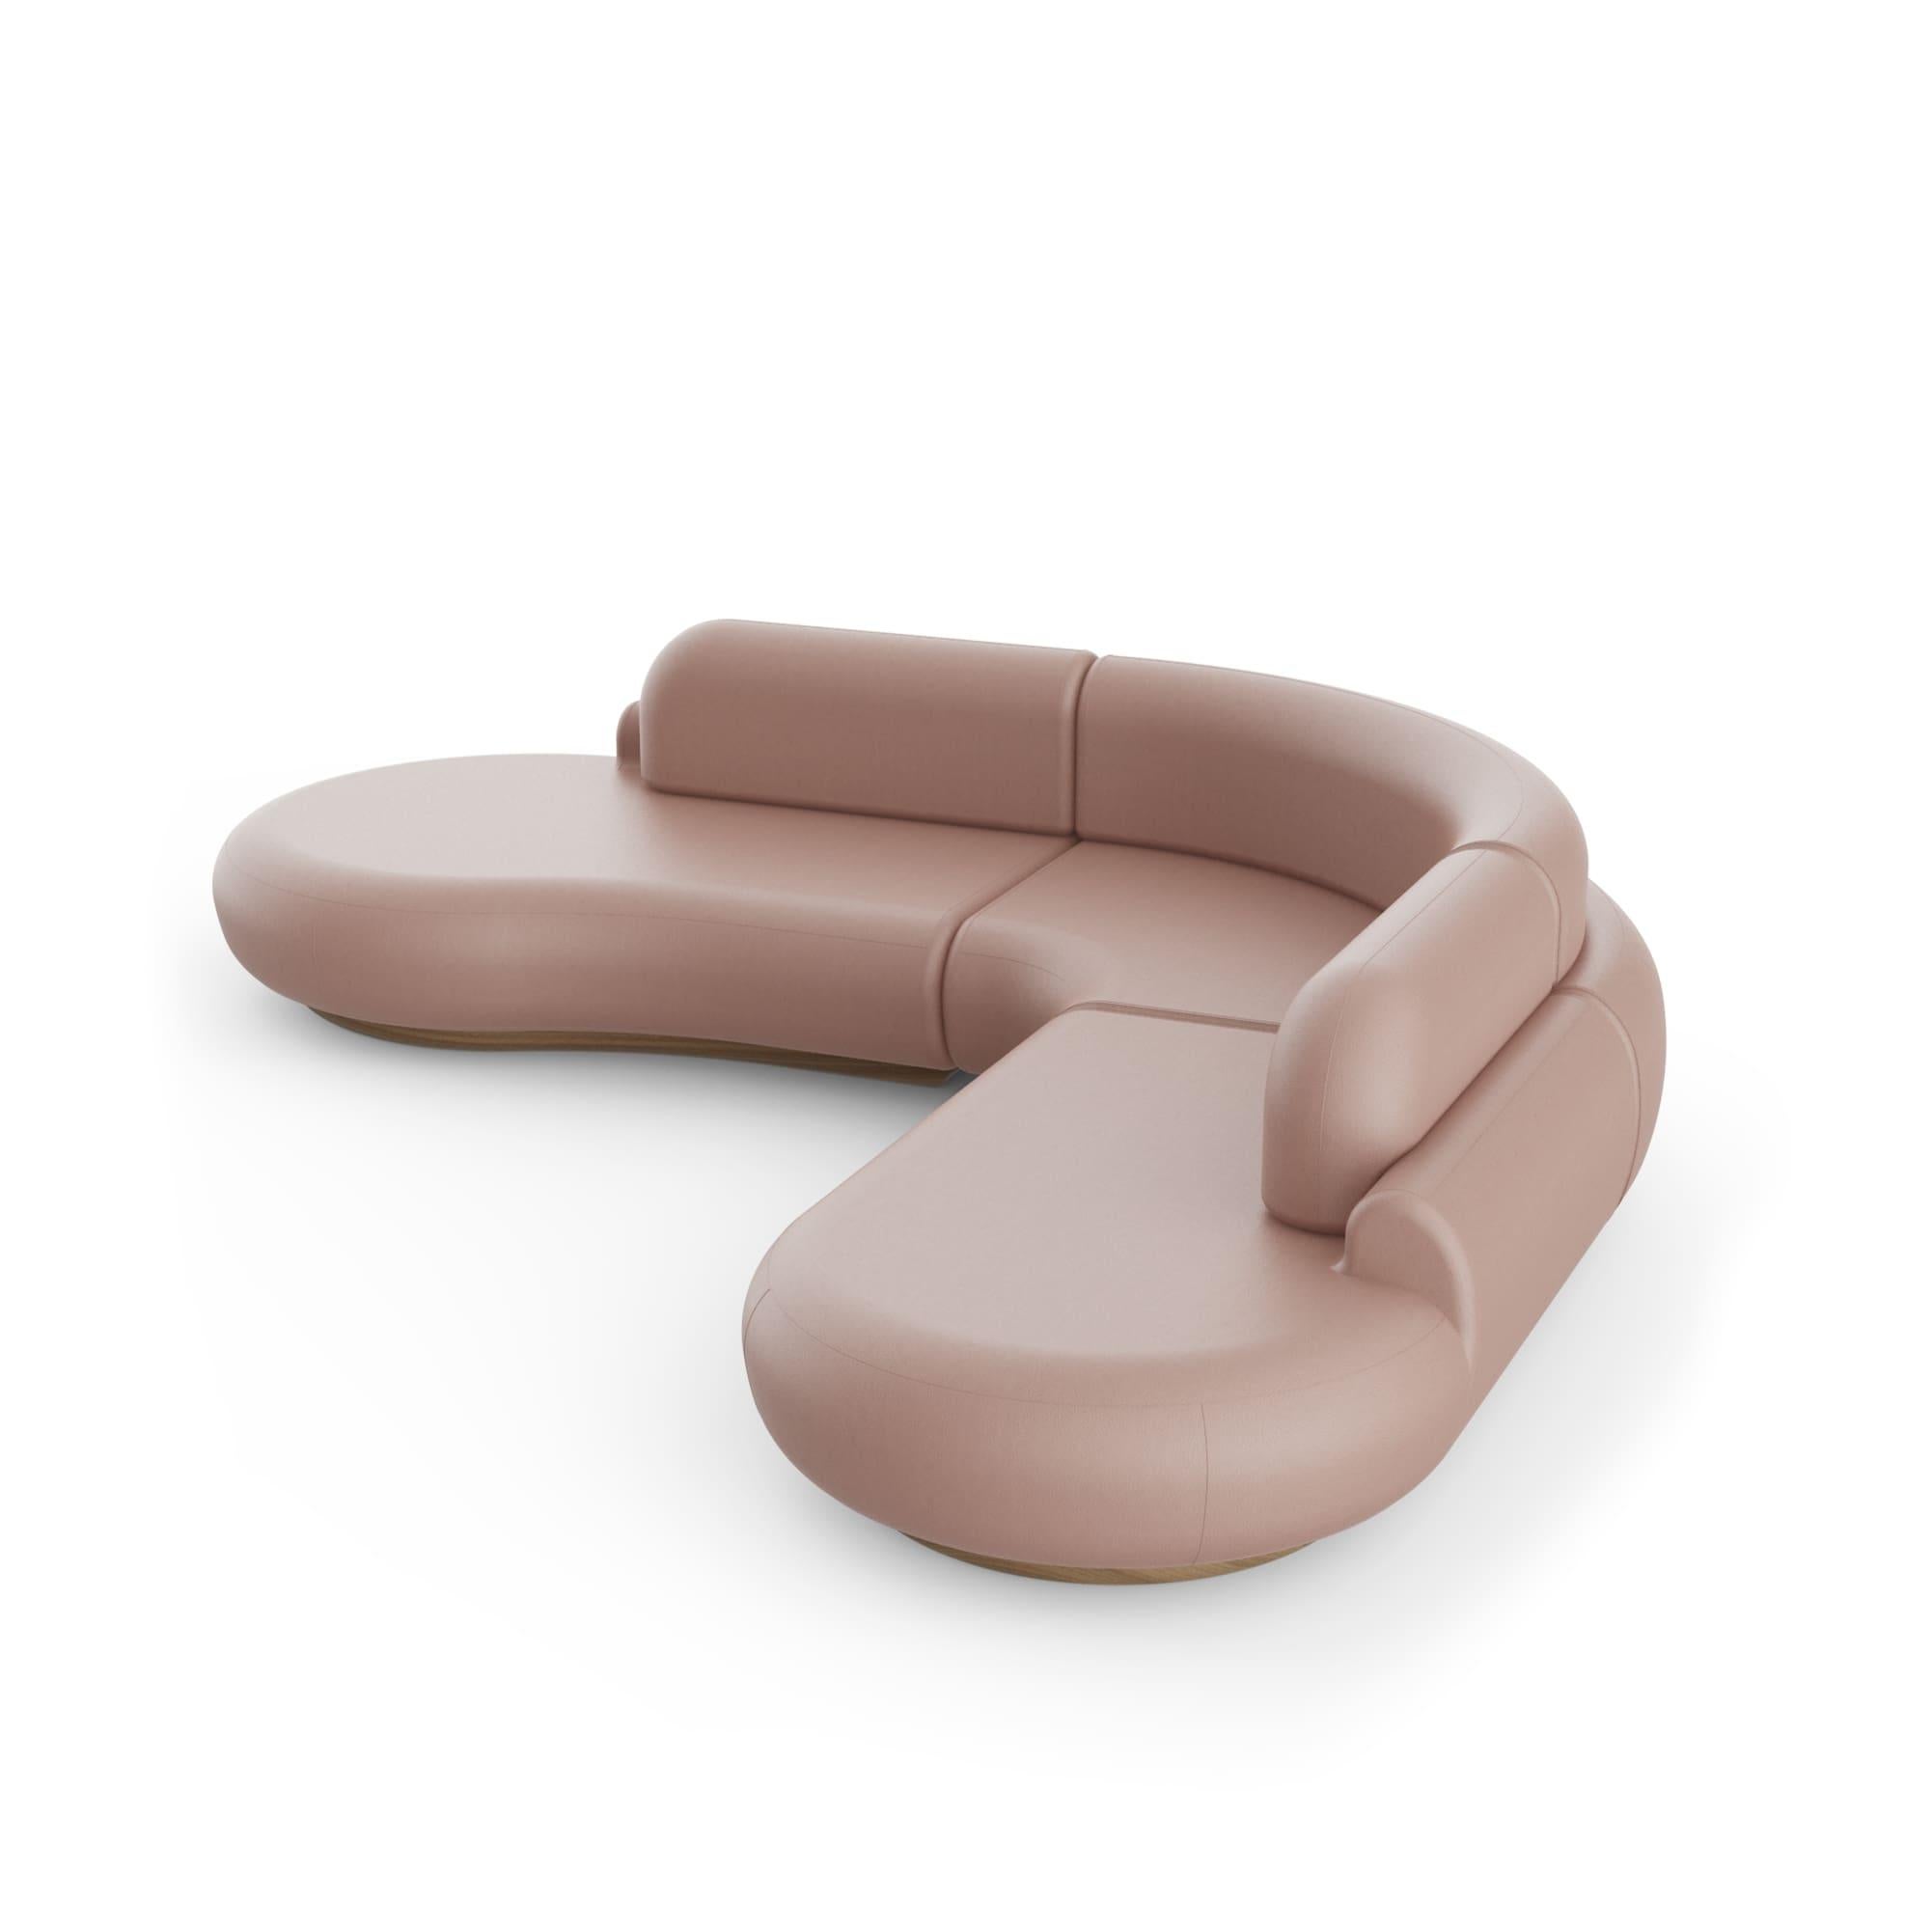 Portuguese Naked Sofa by Dooq